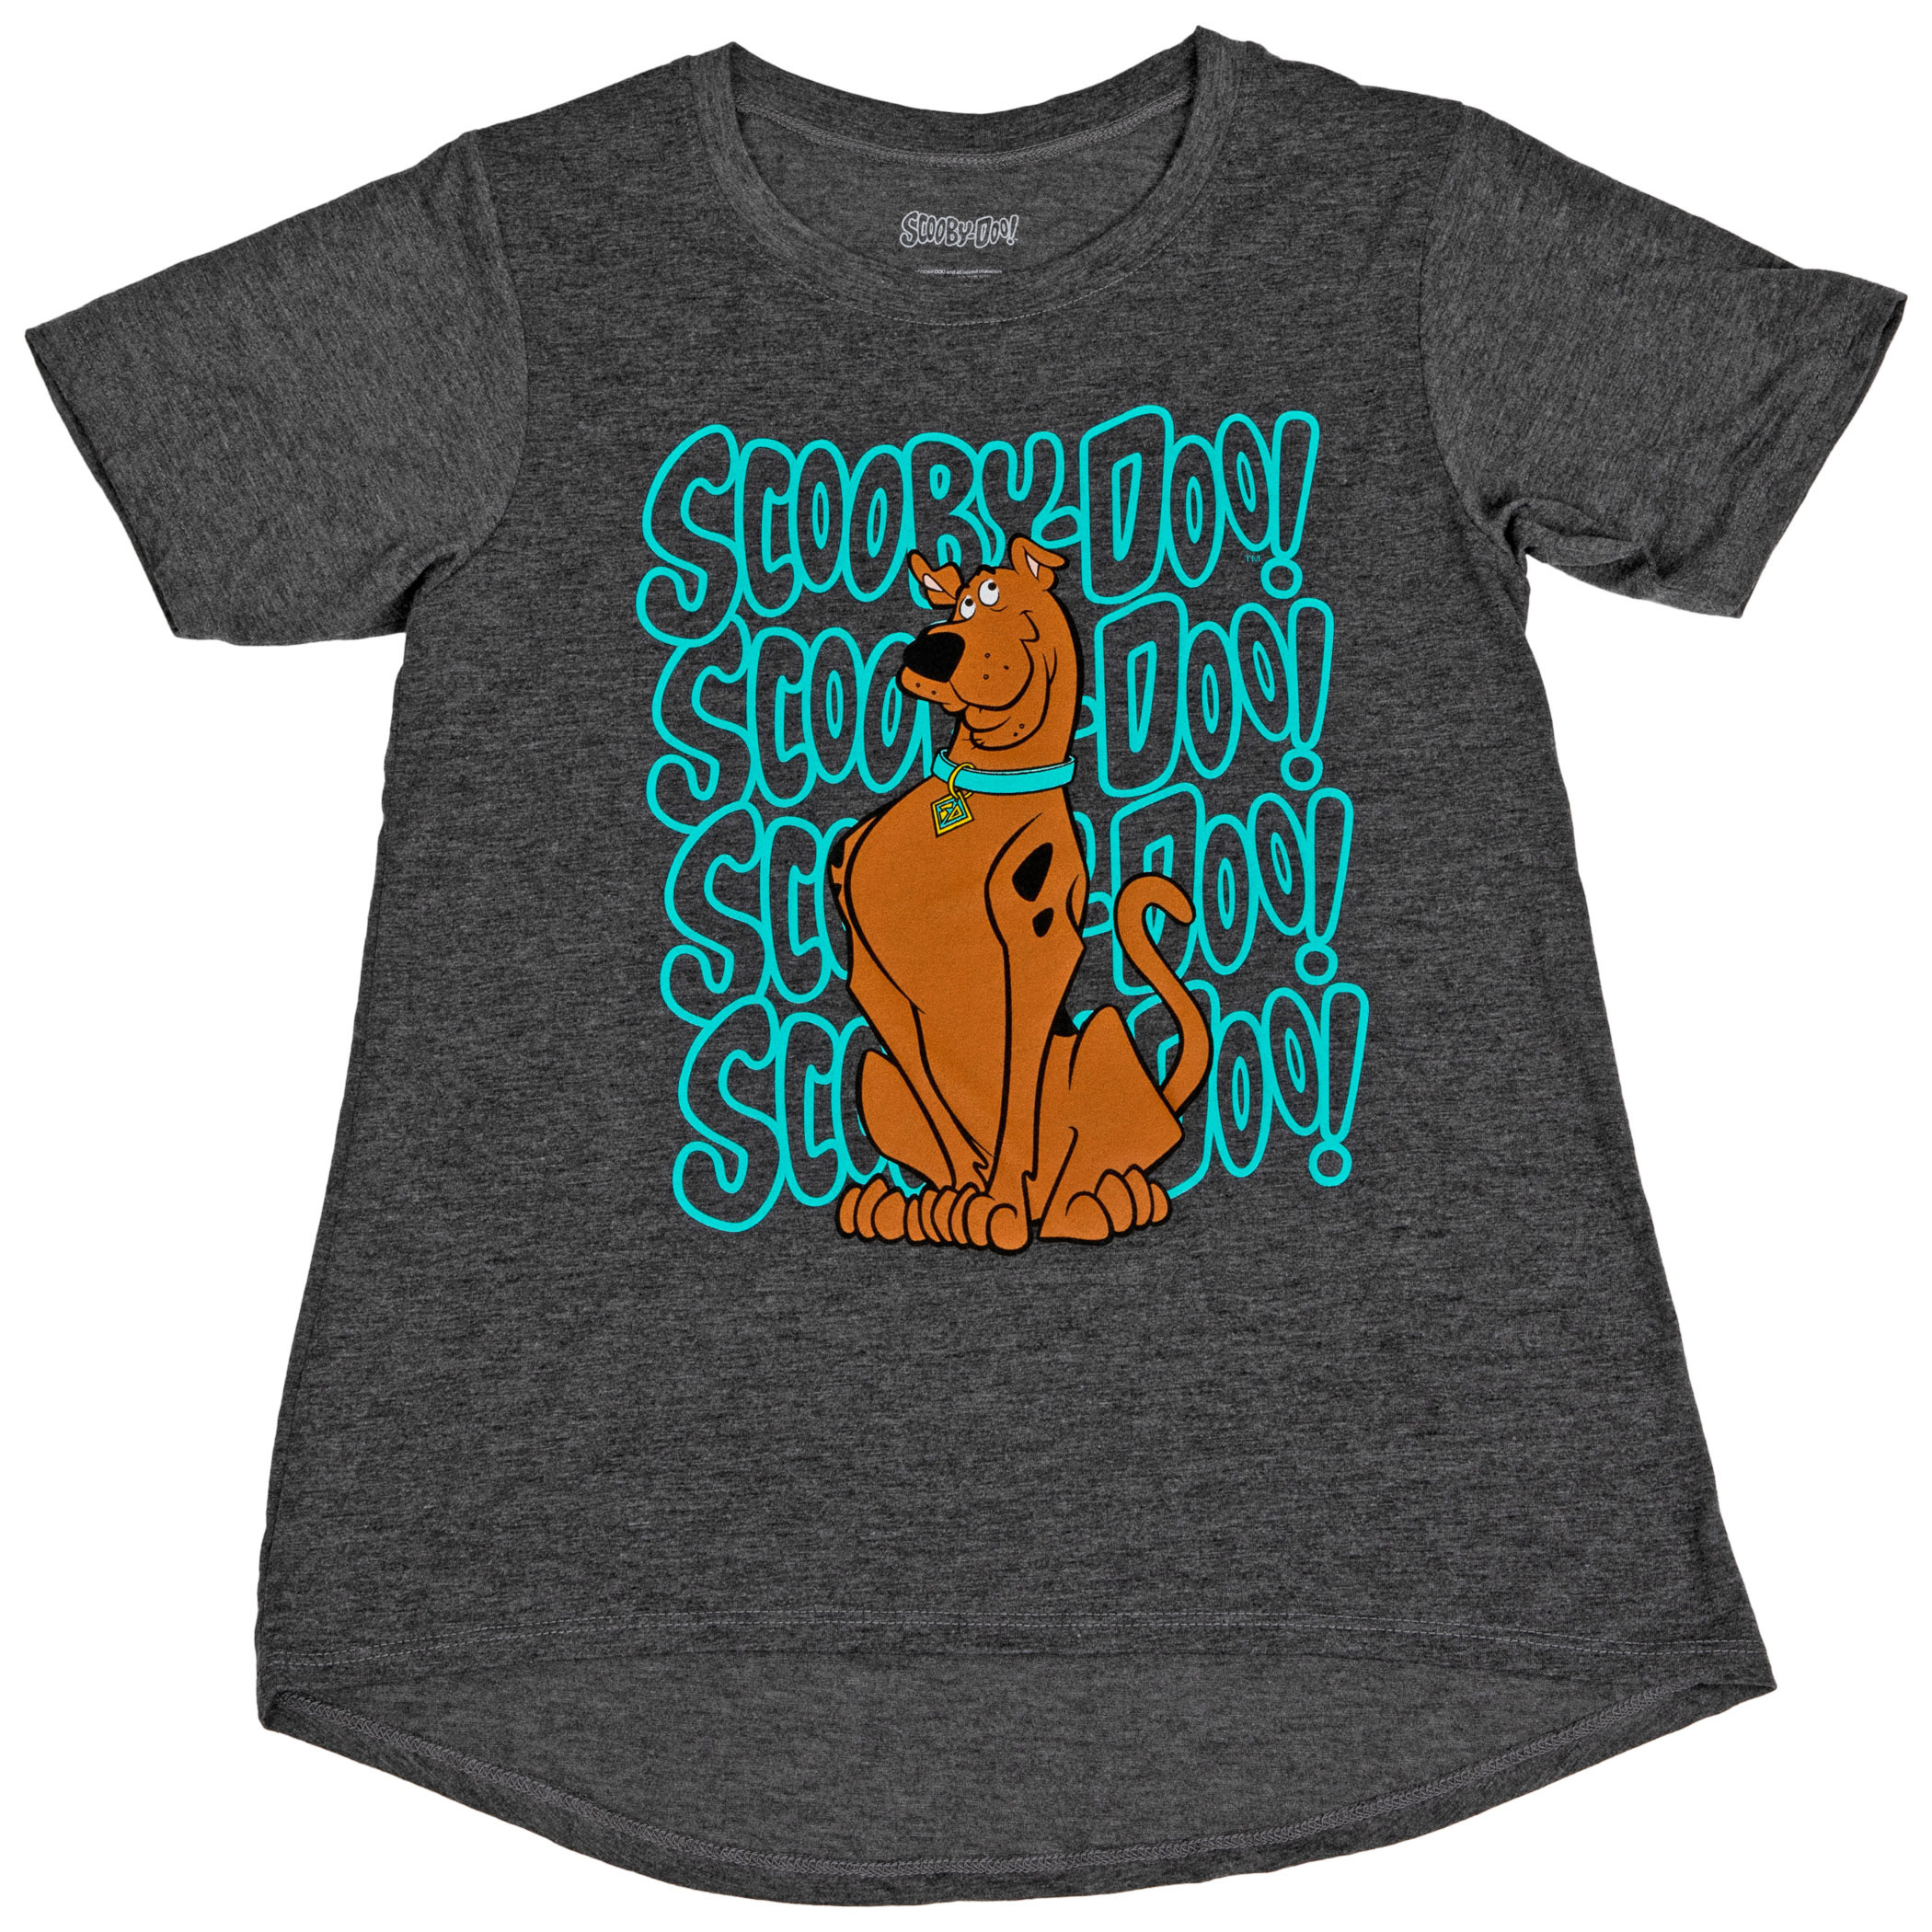 Scooby-Doo Character with Logo Print Women's T-Shirt